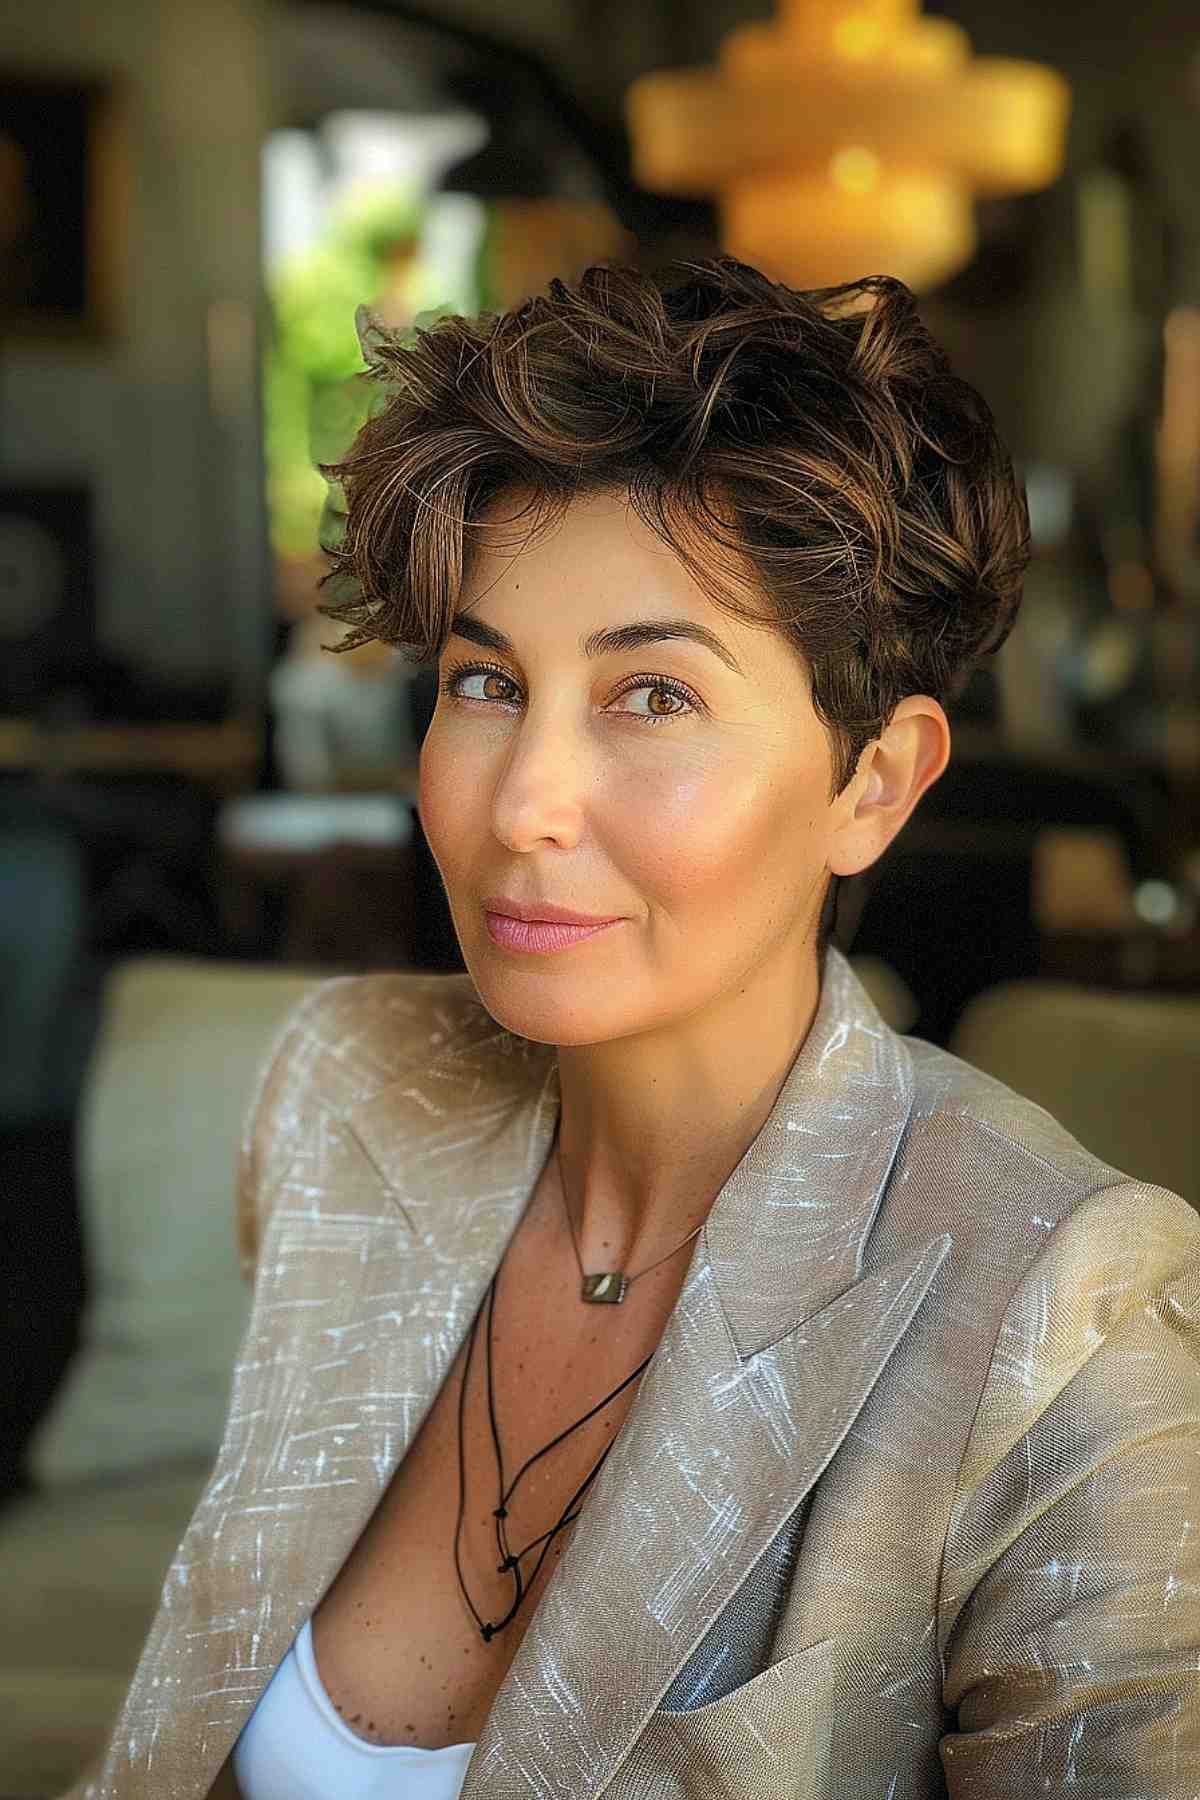 Stylish Woman with Short Textured Brunette Hair